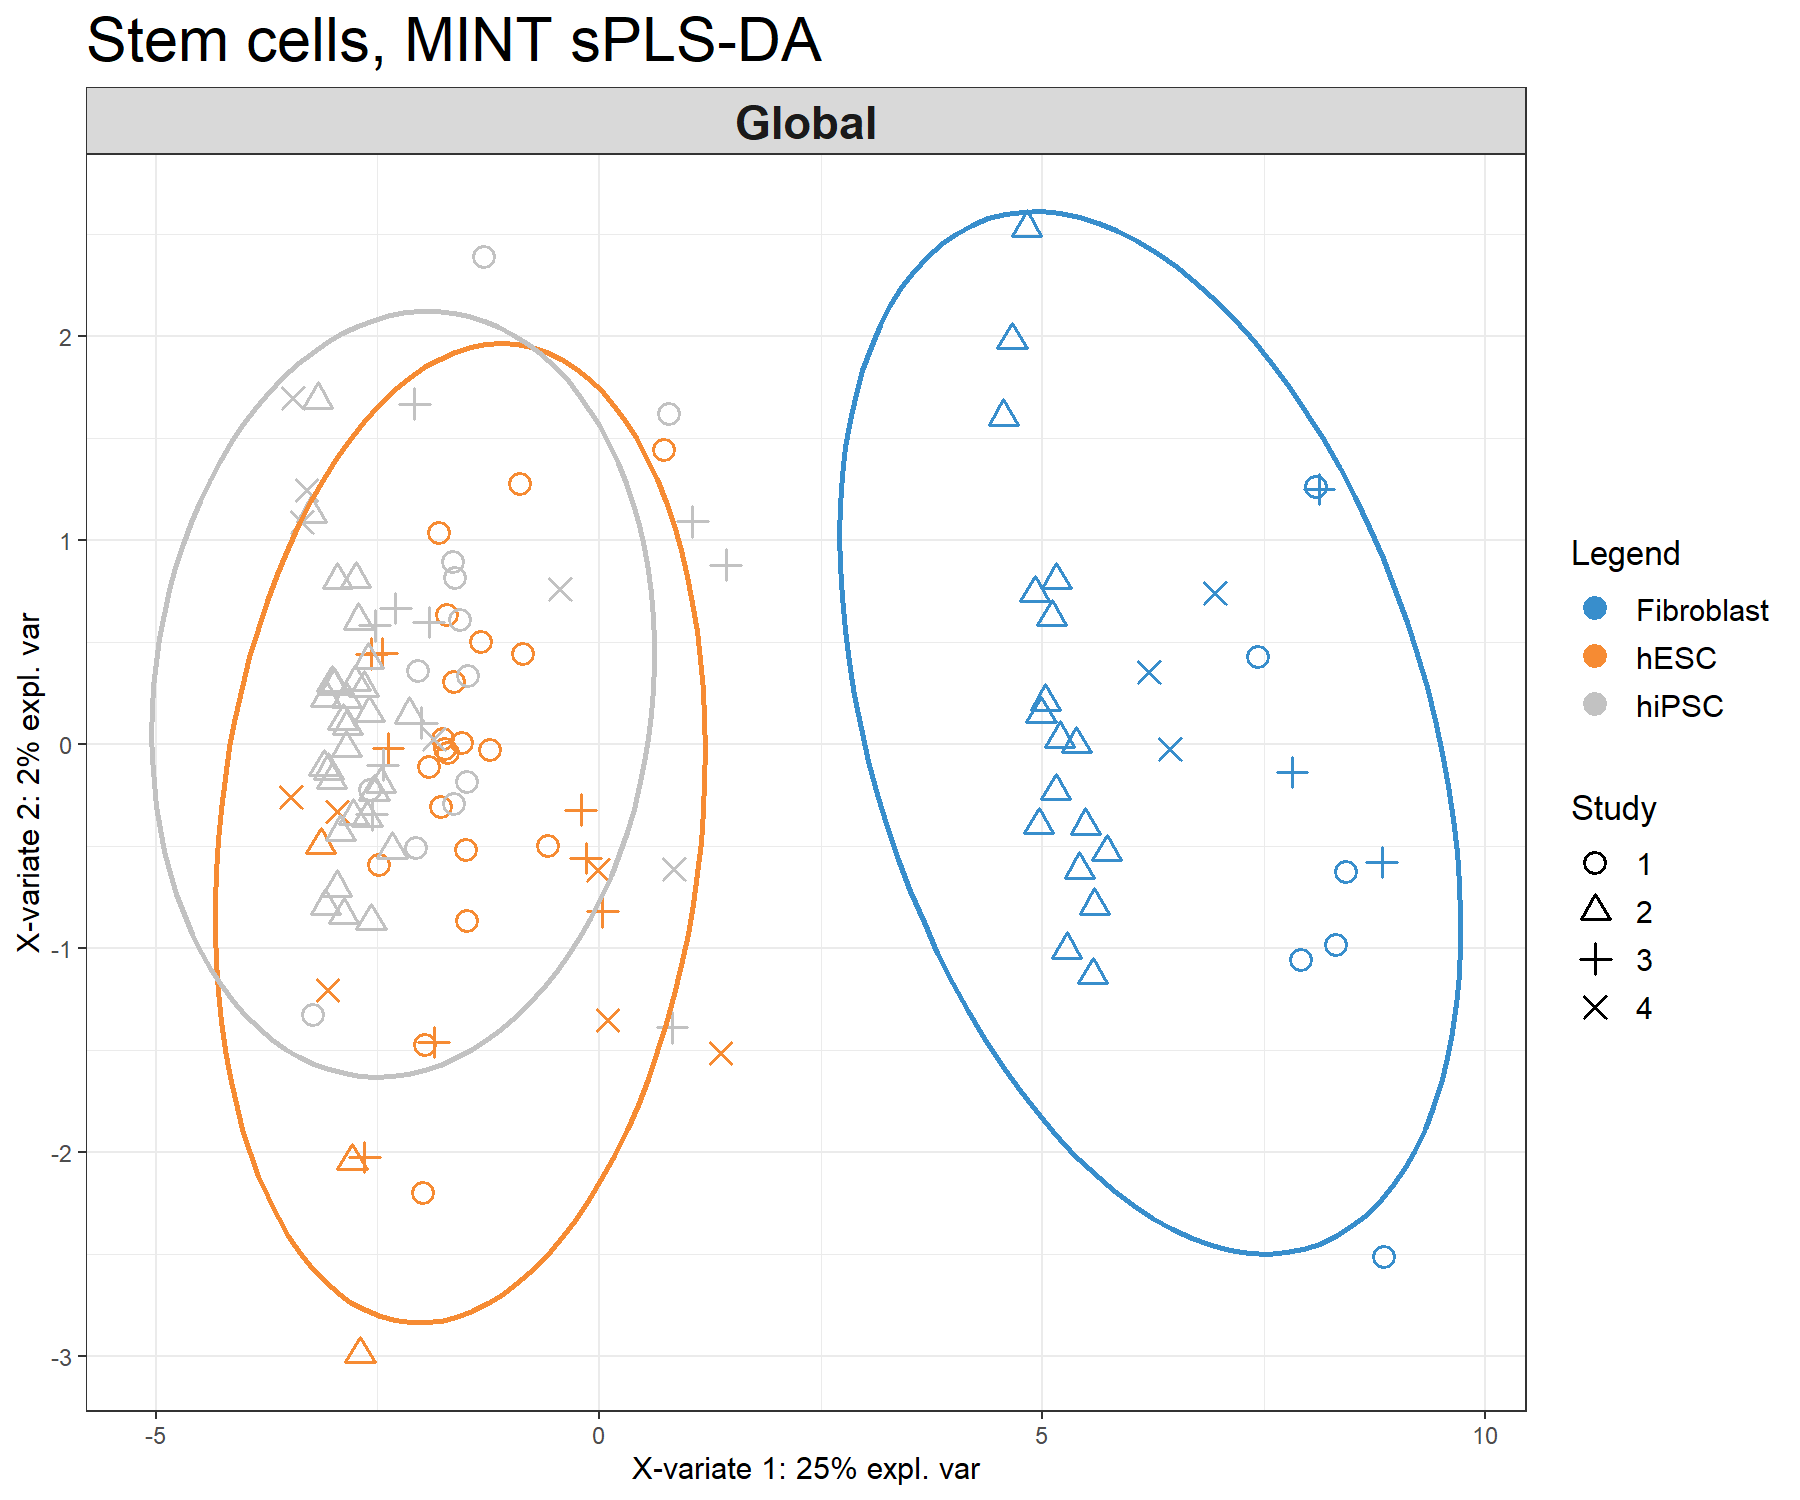 Sample plots from the MINT sPLS-DA performed on the stemcells gene expression data. Samples are projected into the space spanned by the first two components. Samples are coloured by their cell types and symbols indicate study membership. (a) Global components from the model with 95% ellipse confidence intervals around each sample class. (b) Partial components per study show a good agreement across studies. Component 1 discriminates fibroblast vs. the rest, component 2 discriminates further hESC vs. hiPSC.